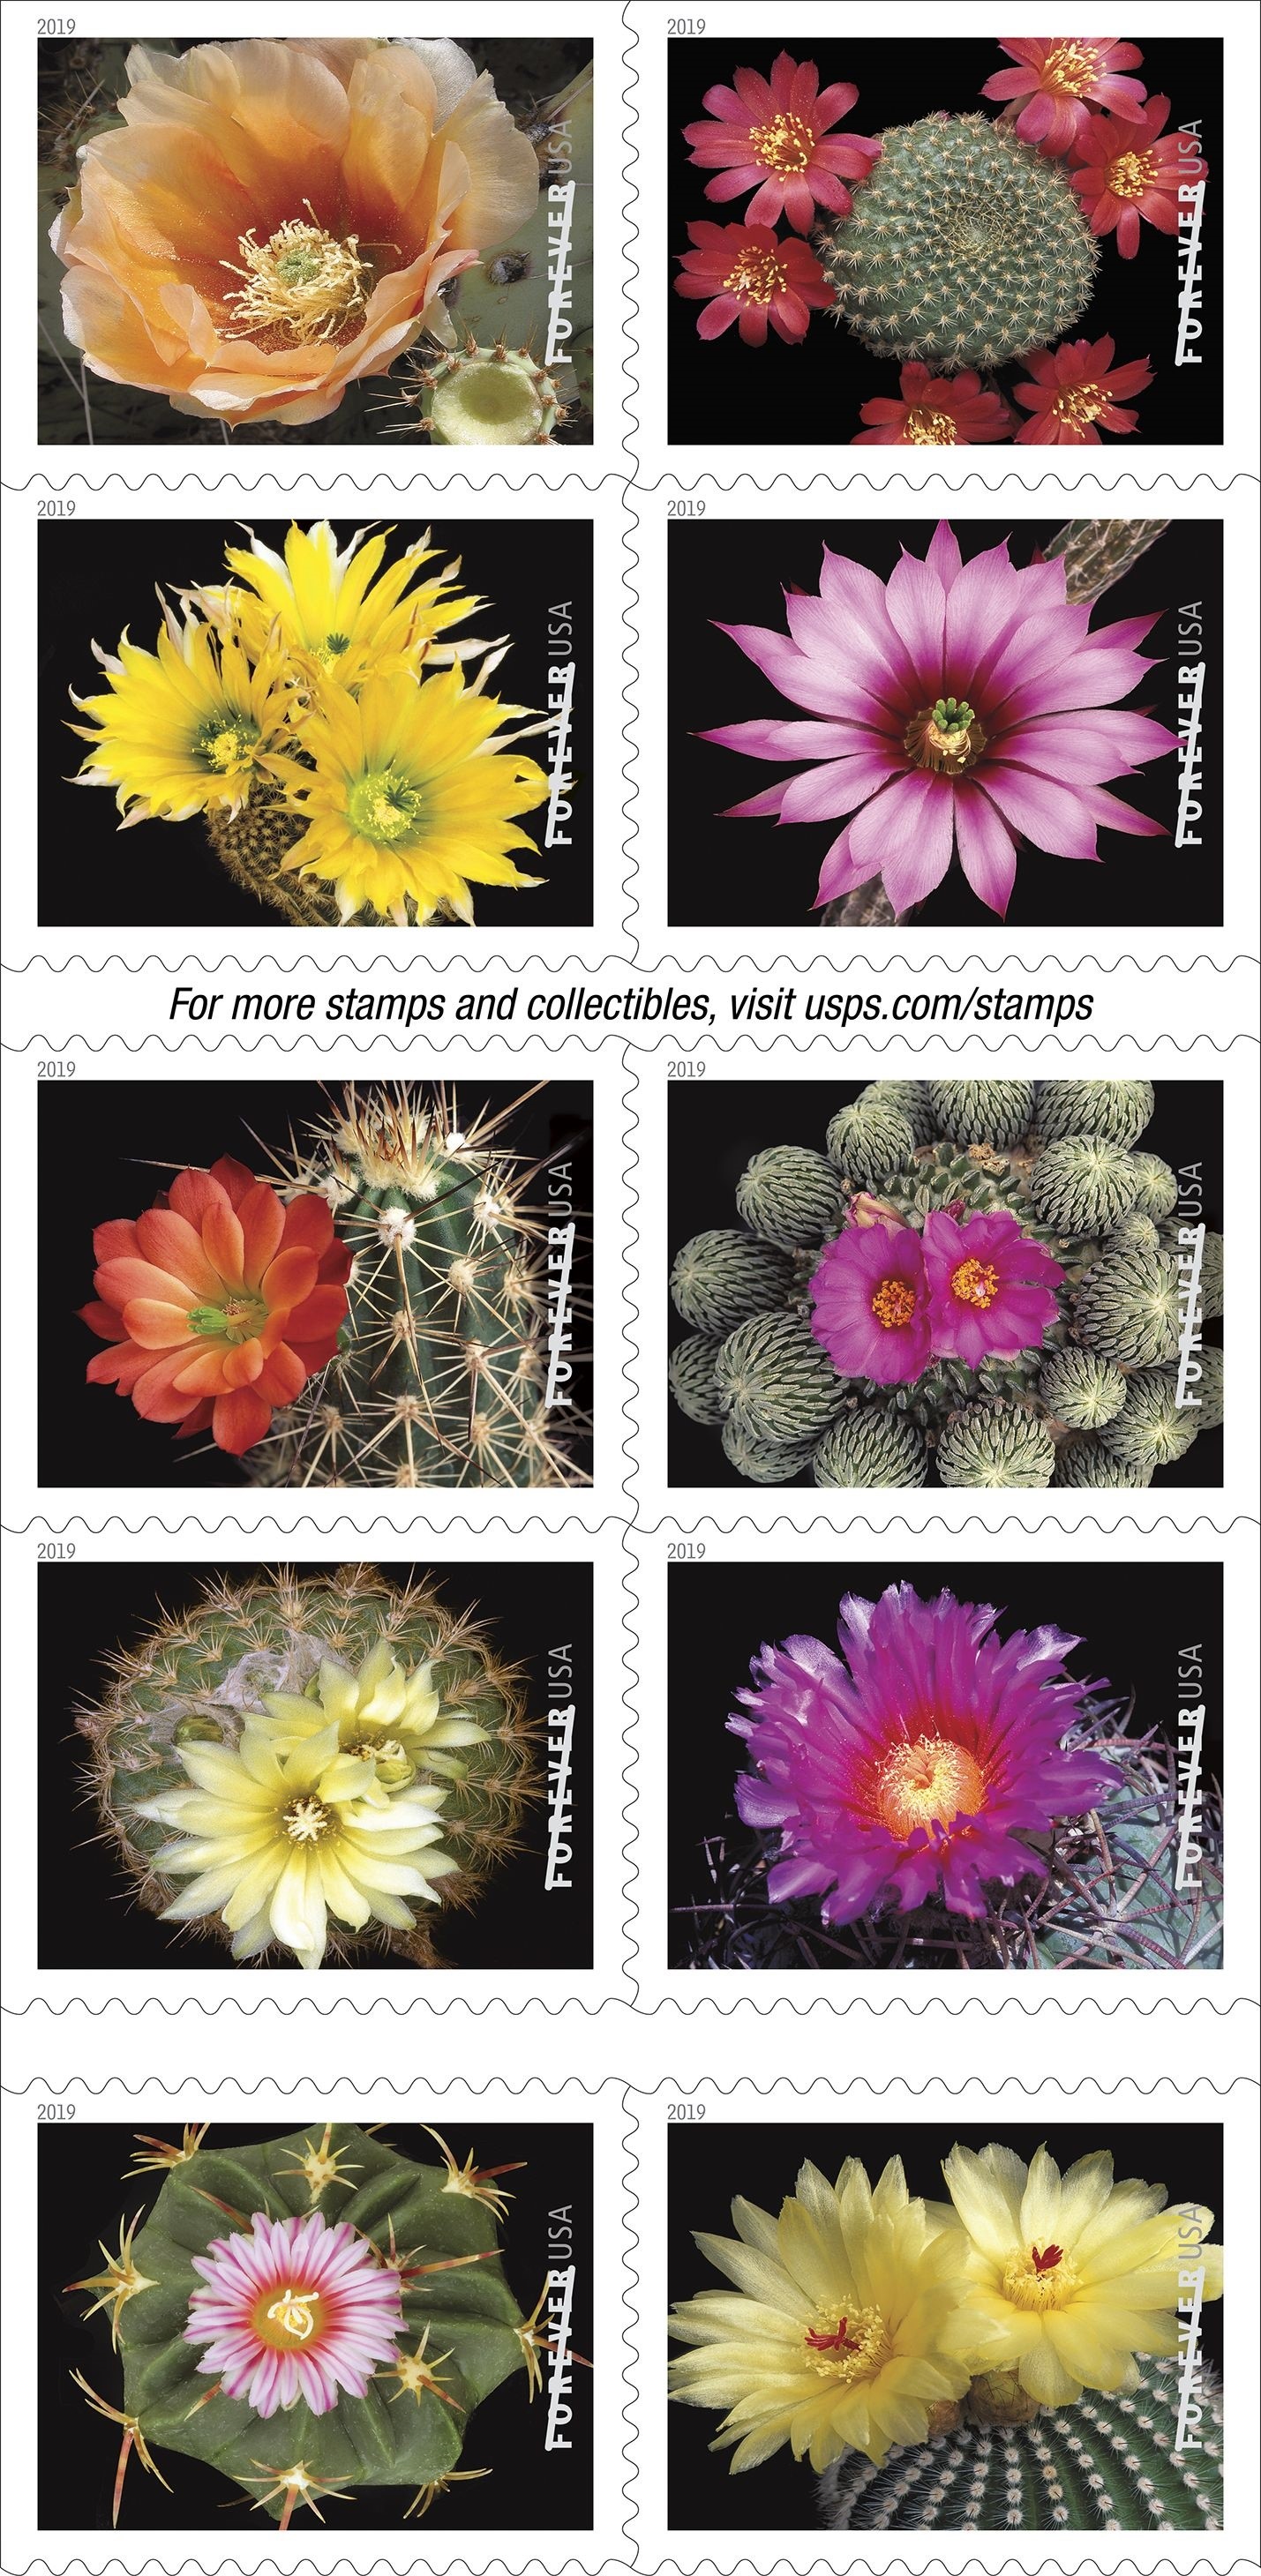 Cactus Flowers Forever stamps